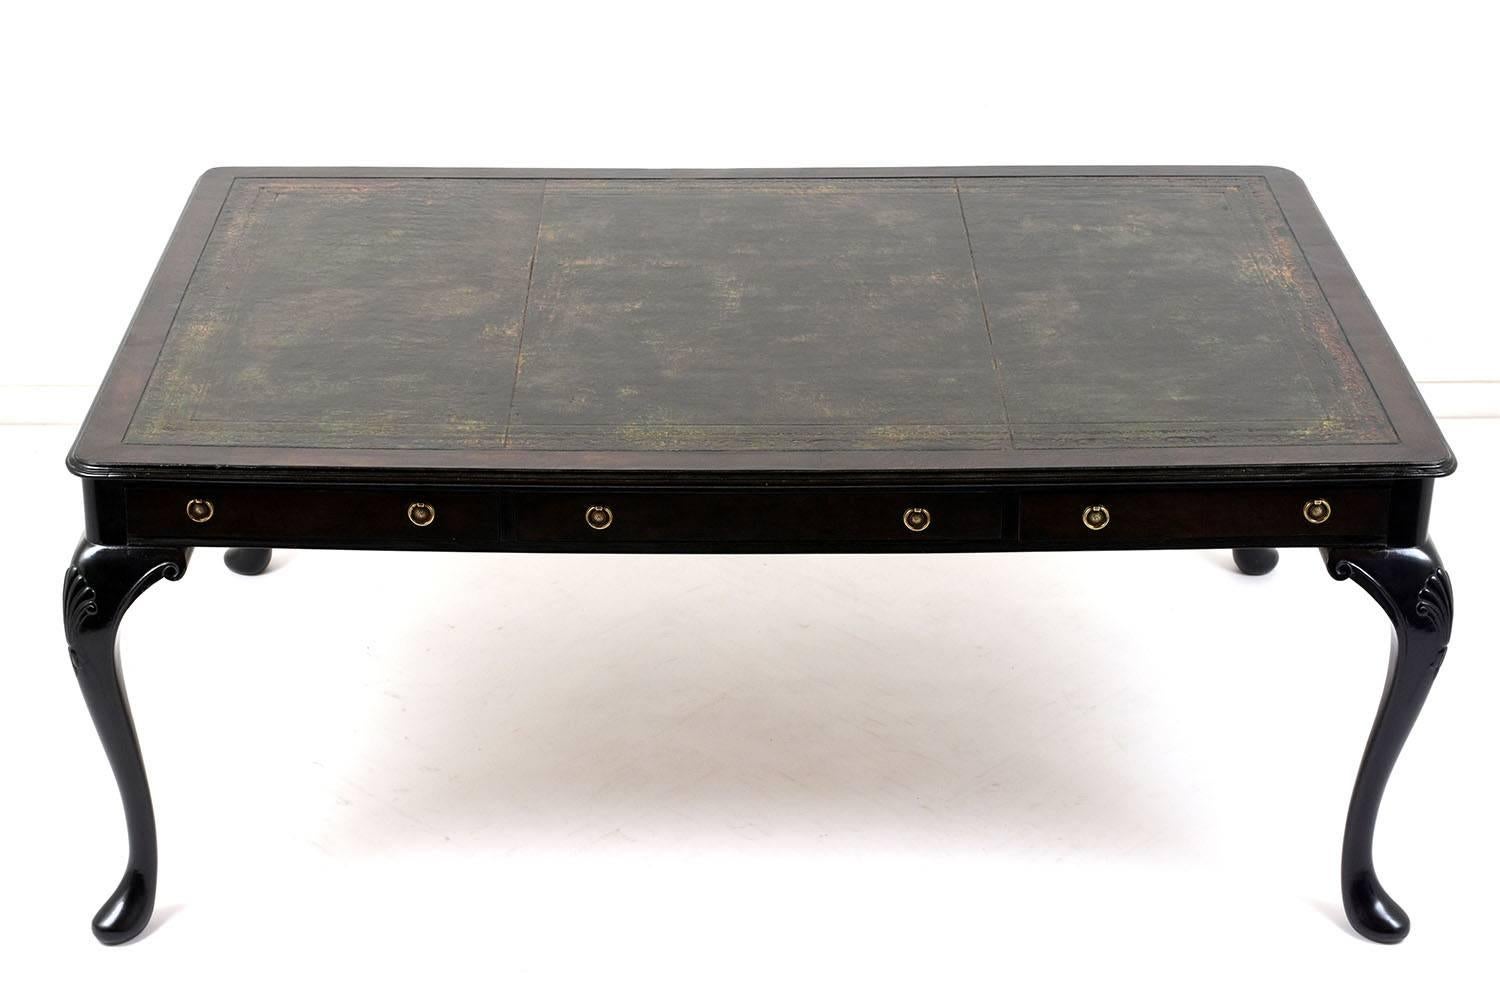 This elegant 1910s English partners desk is made of solid mahogany wood ebonized in a rich black color with a lacquered finish. The desk top features a three section leather embossed top with beautiful patina details. The body of the desk features